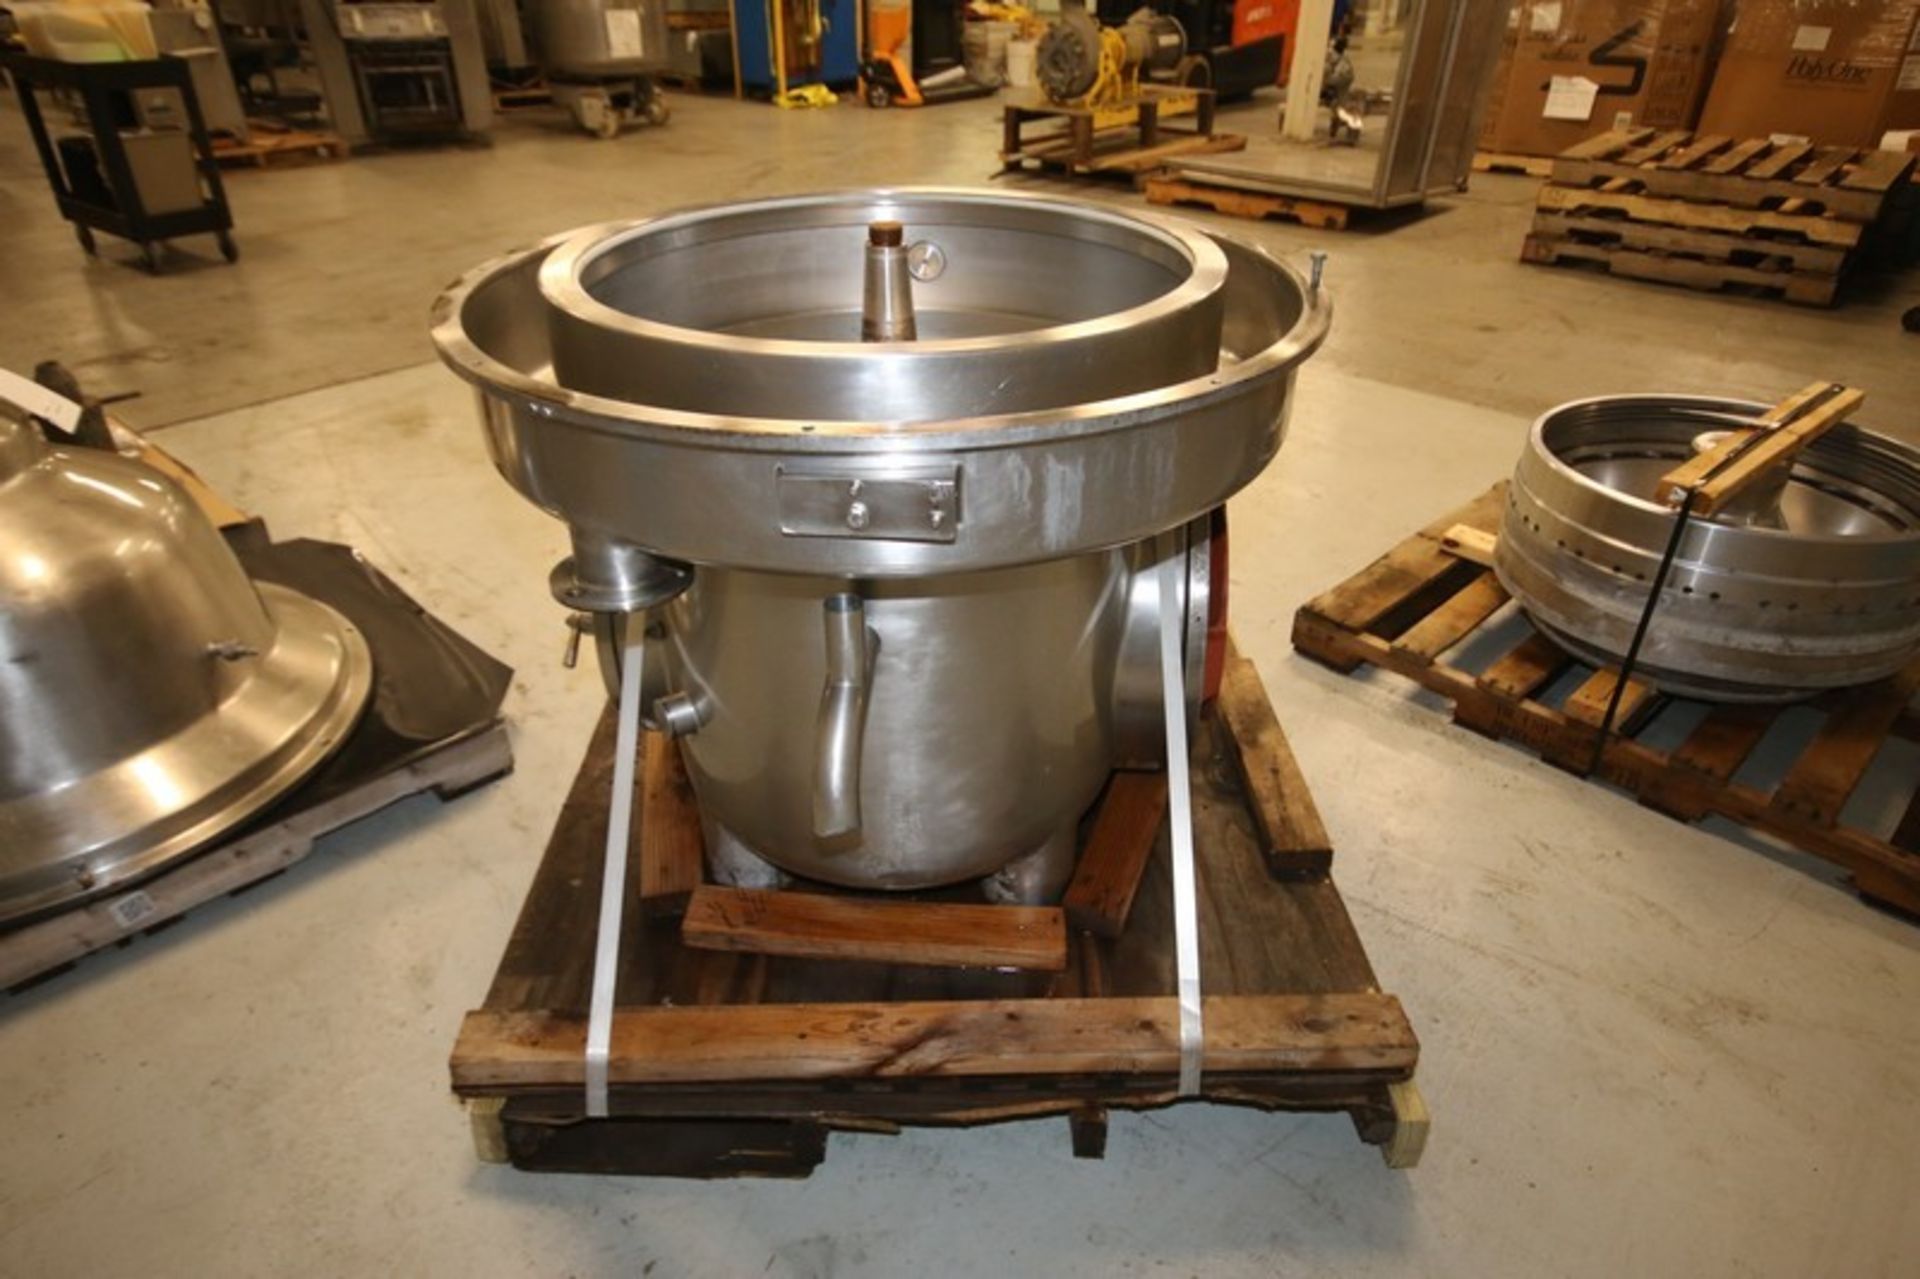 Westfalia CIP S/S Separator,Model MSA 200-01-076, SN 1652530, Includes Bowl Assembly, Lid, Top Cream - Image 5 of 26